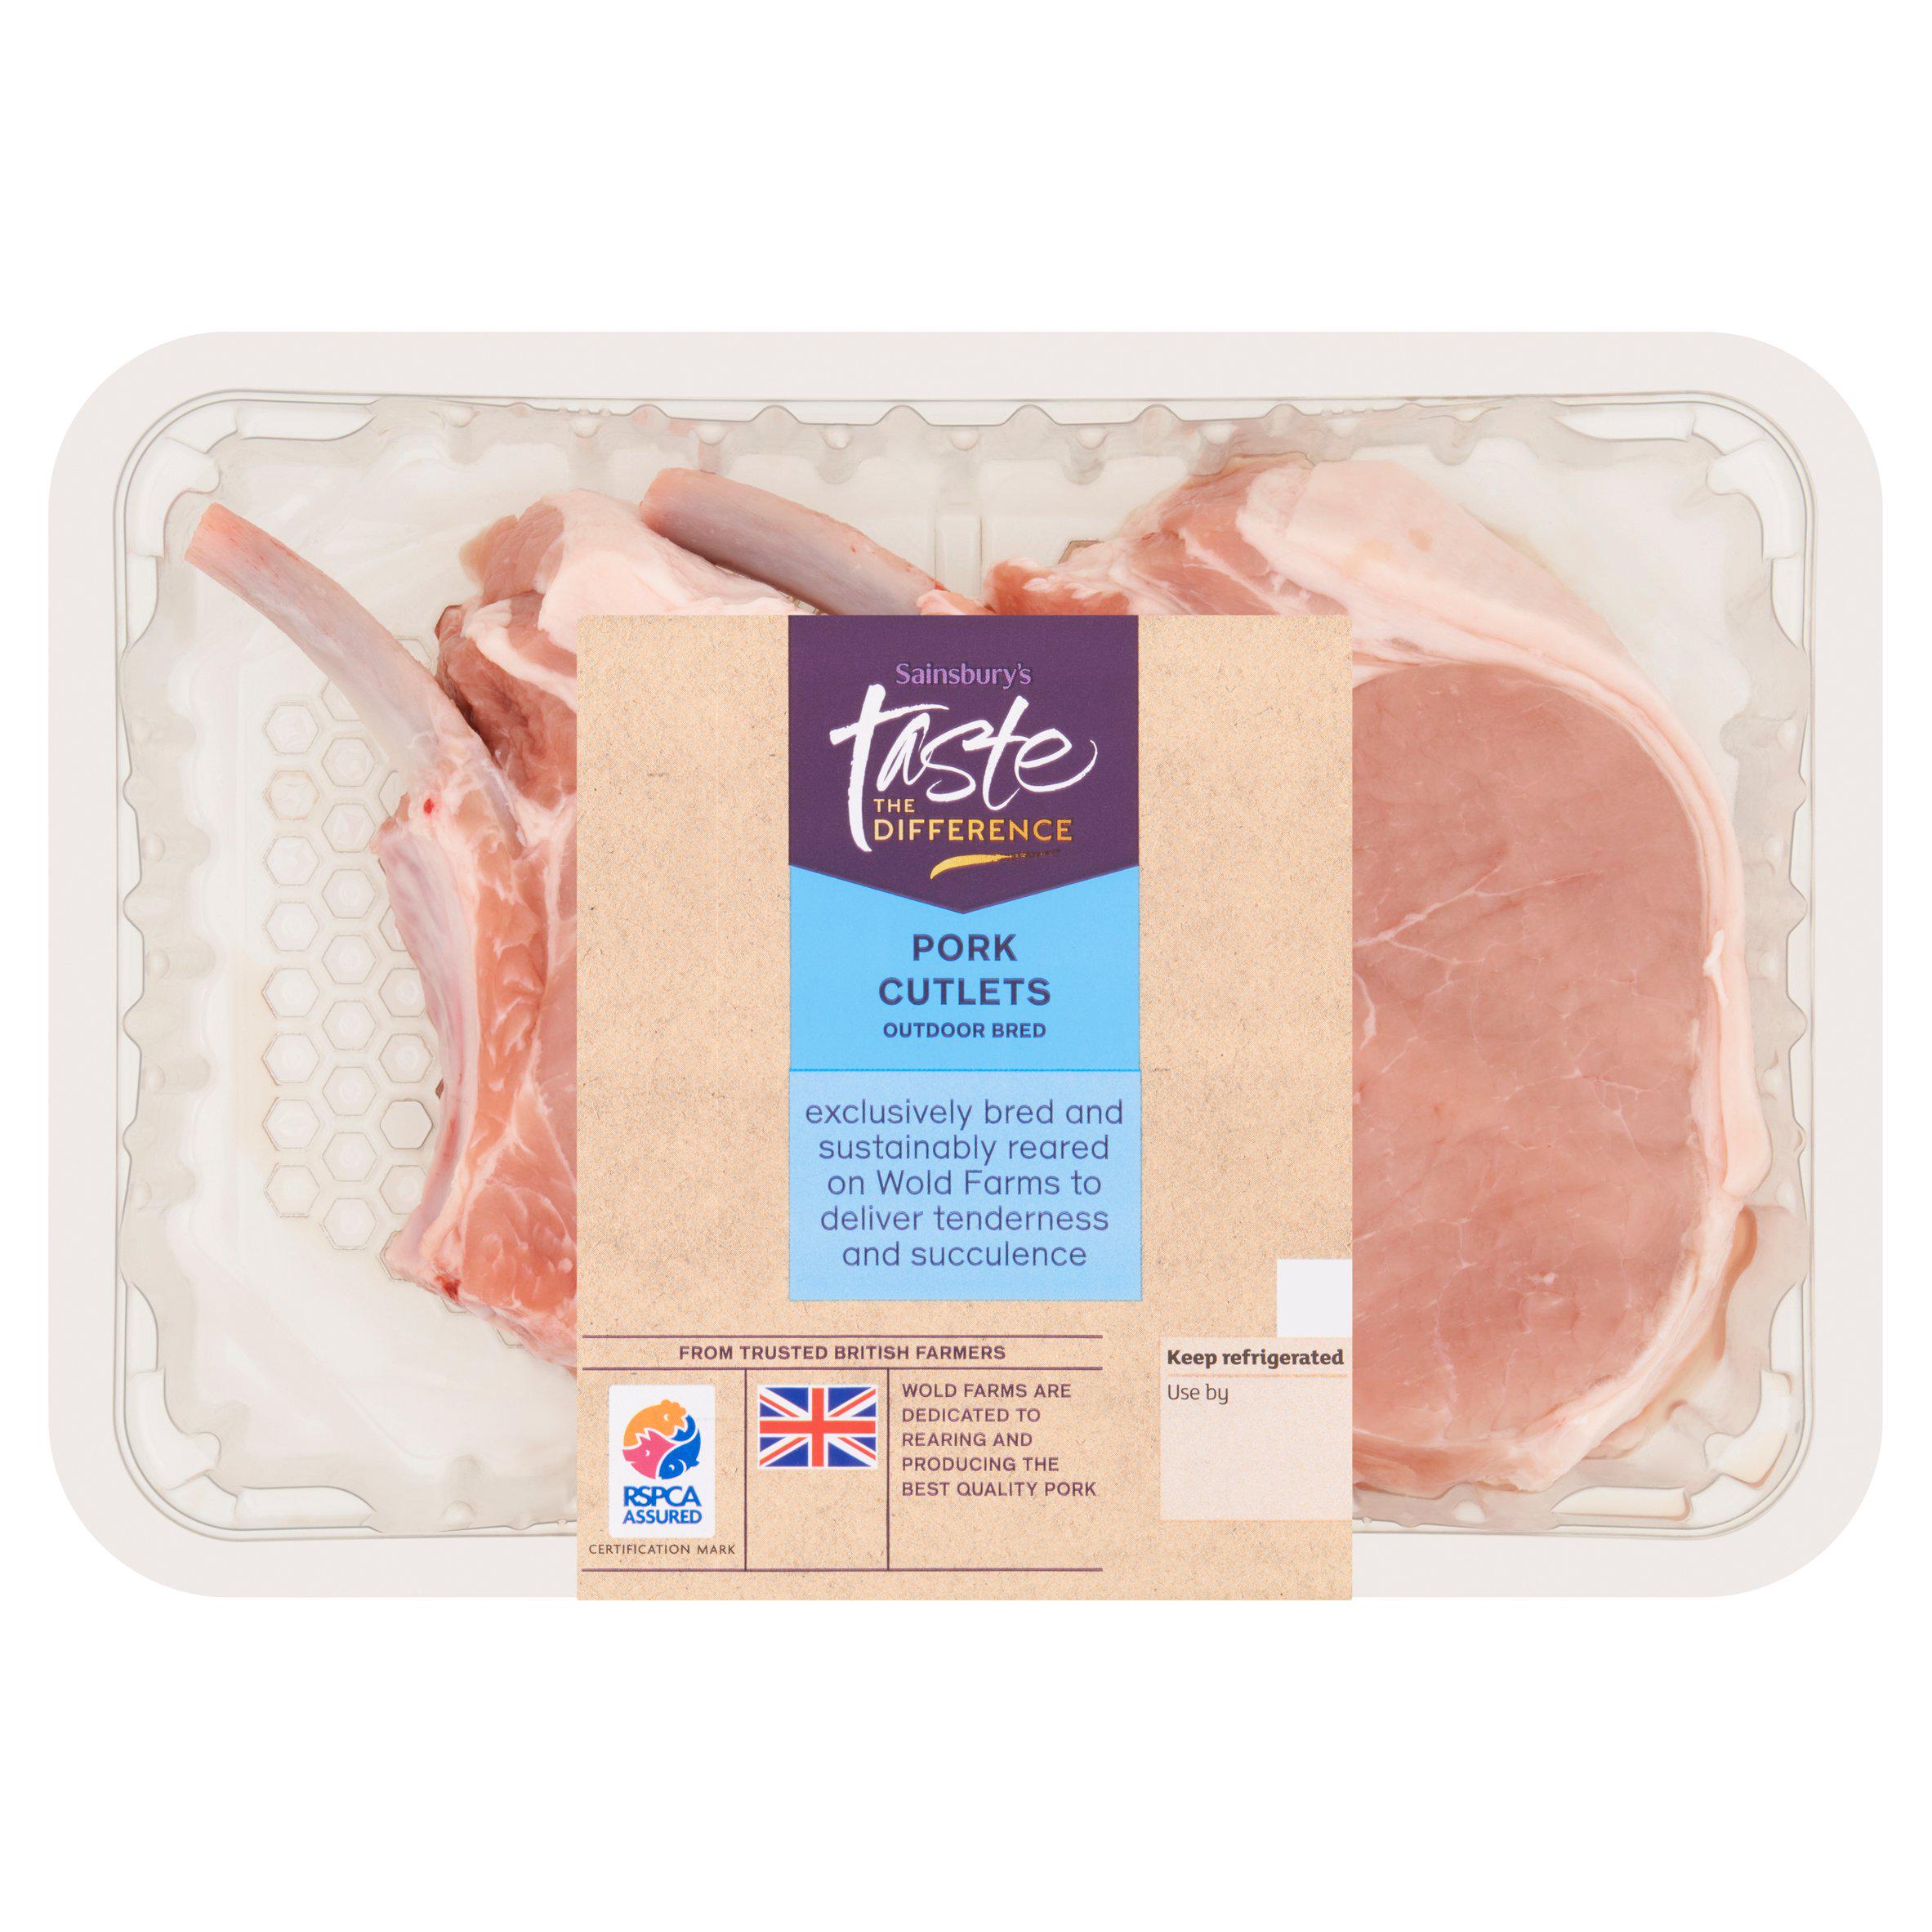 Sainsbury's Outdoor Bred British Pork Cutlets, Taste the Difference x2 550g